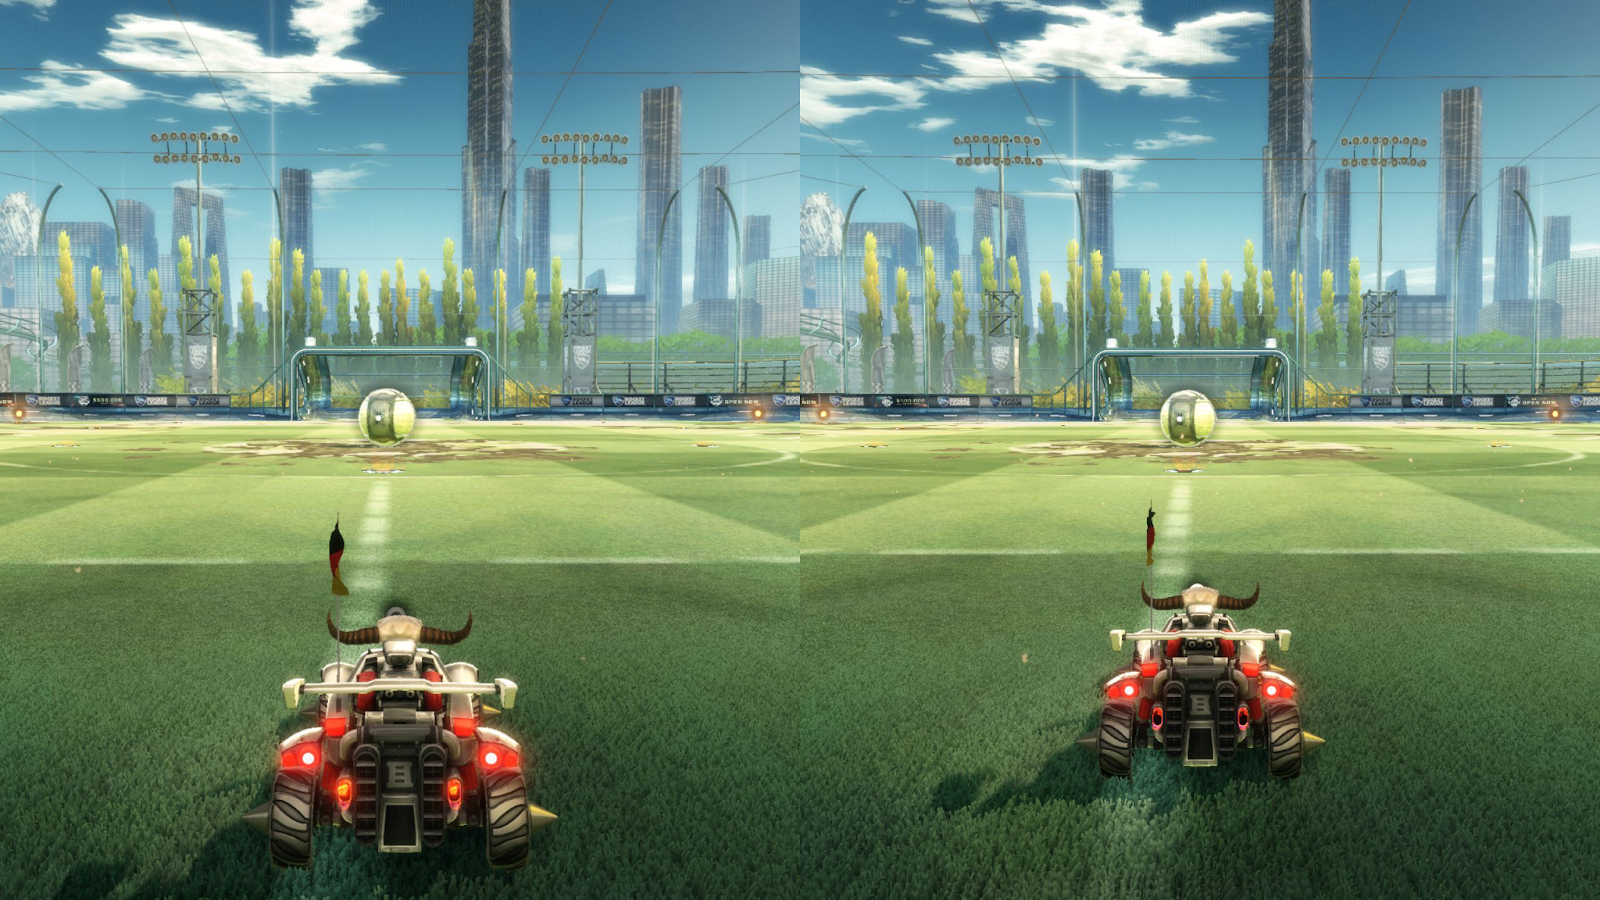 How to adjust your camera in Rocket League